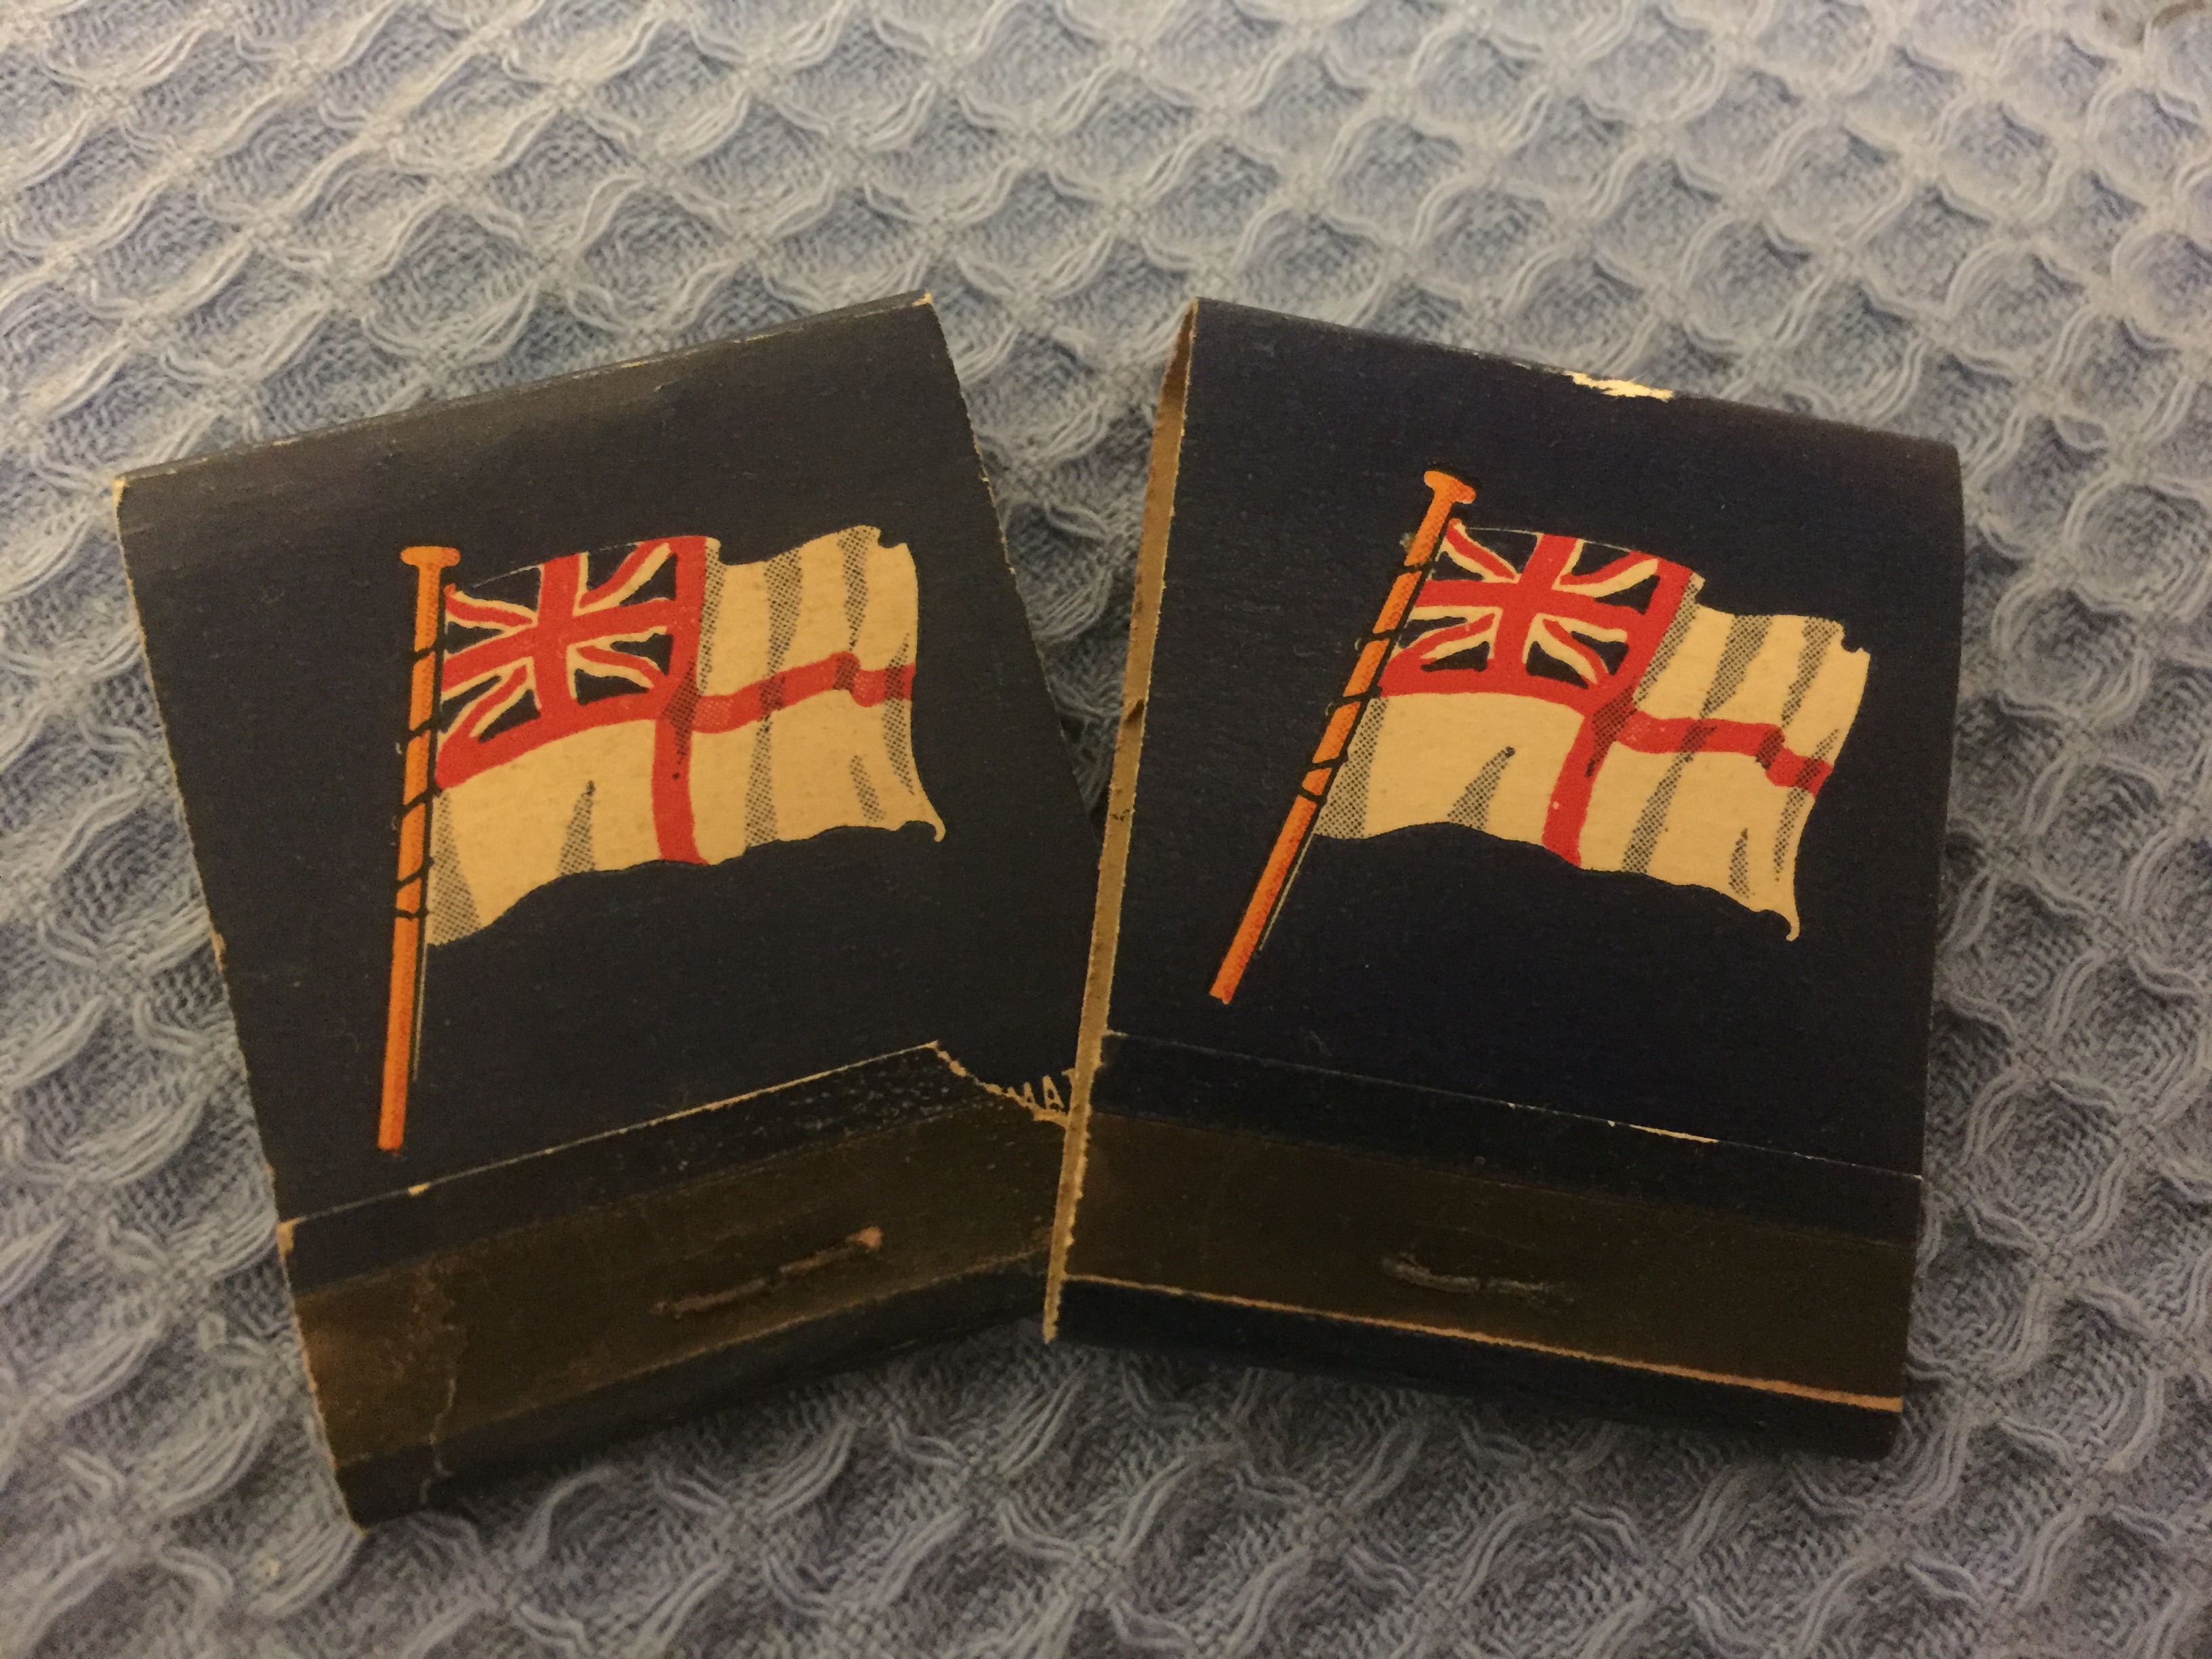 TWO BOXES OF VERY EARLY UNUSED FLAT PACK MATCHES FROM CANADIAN PACIFIC LINE